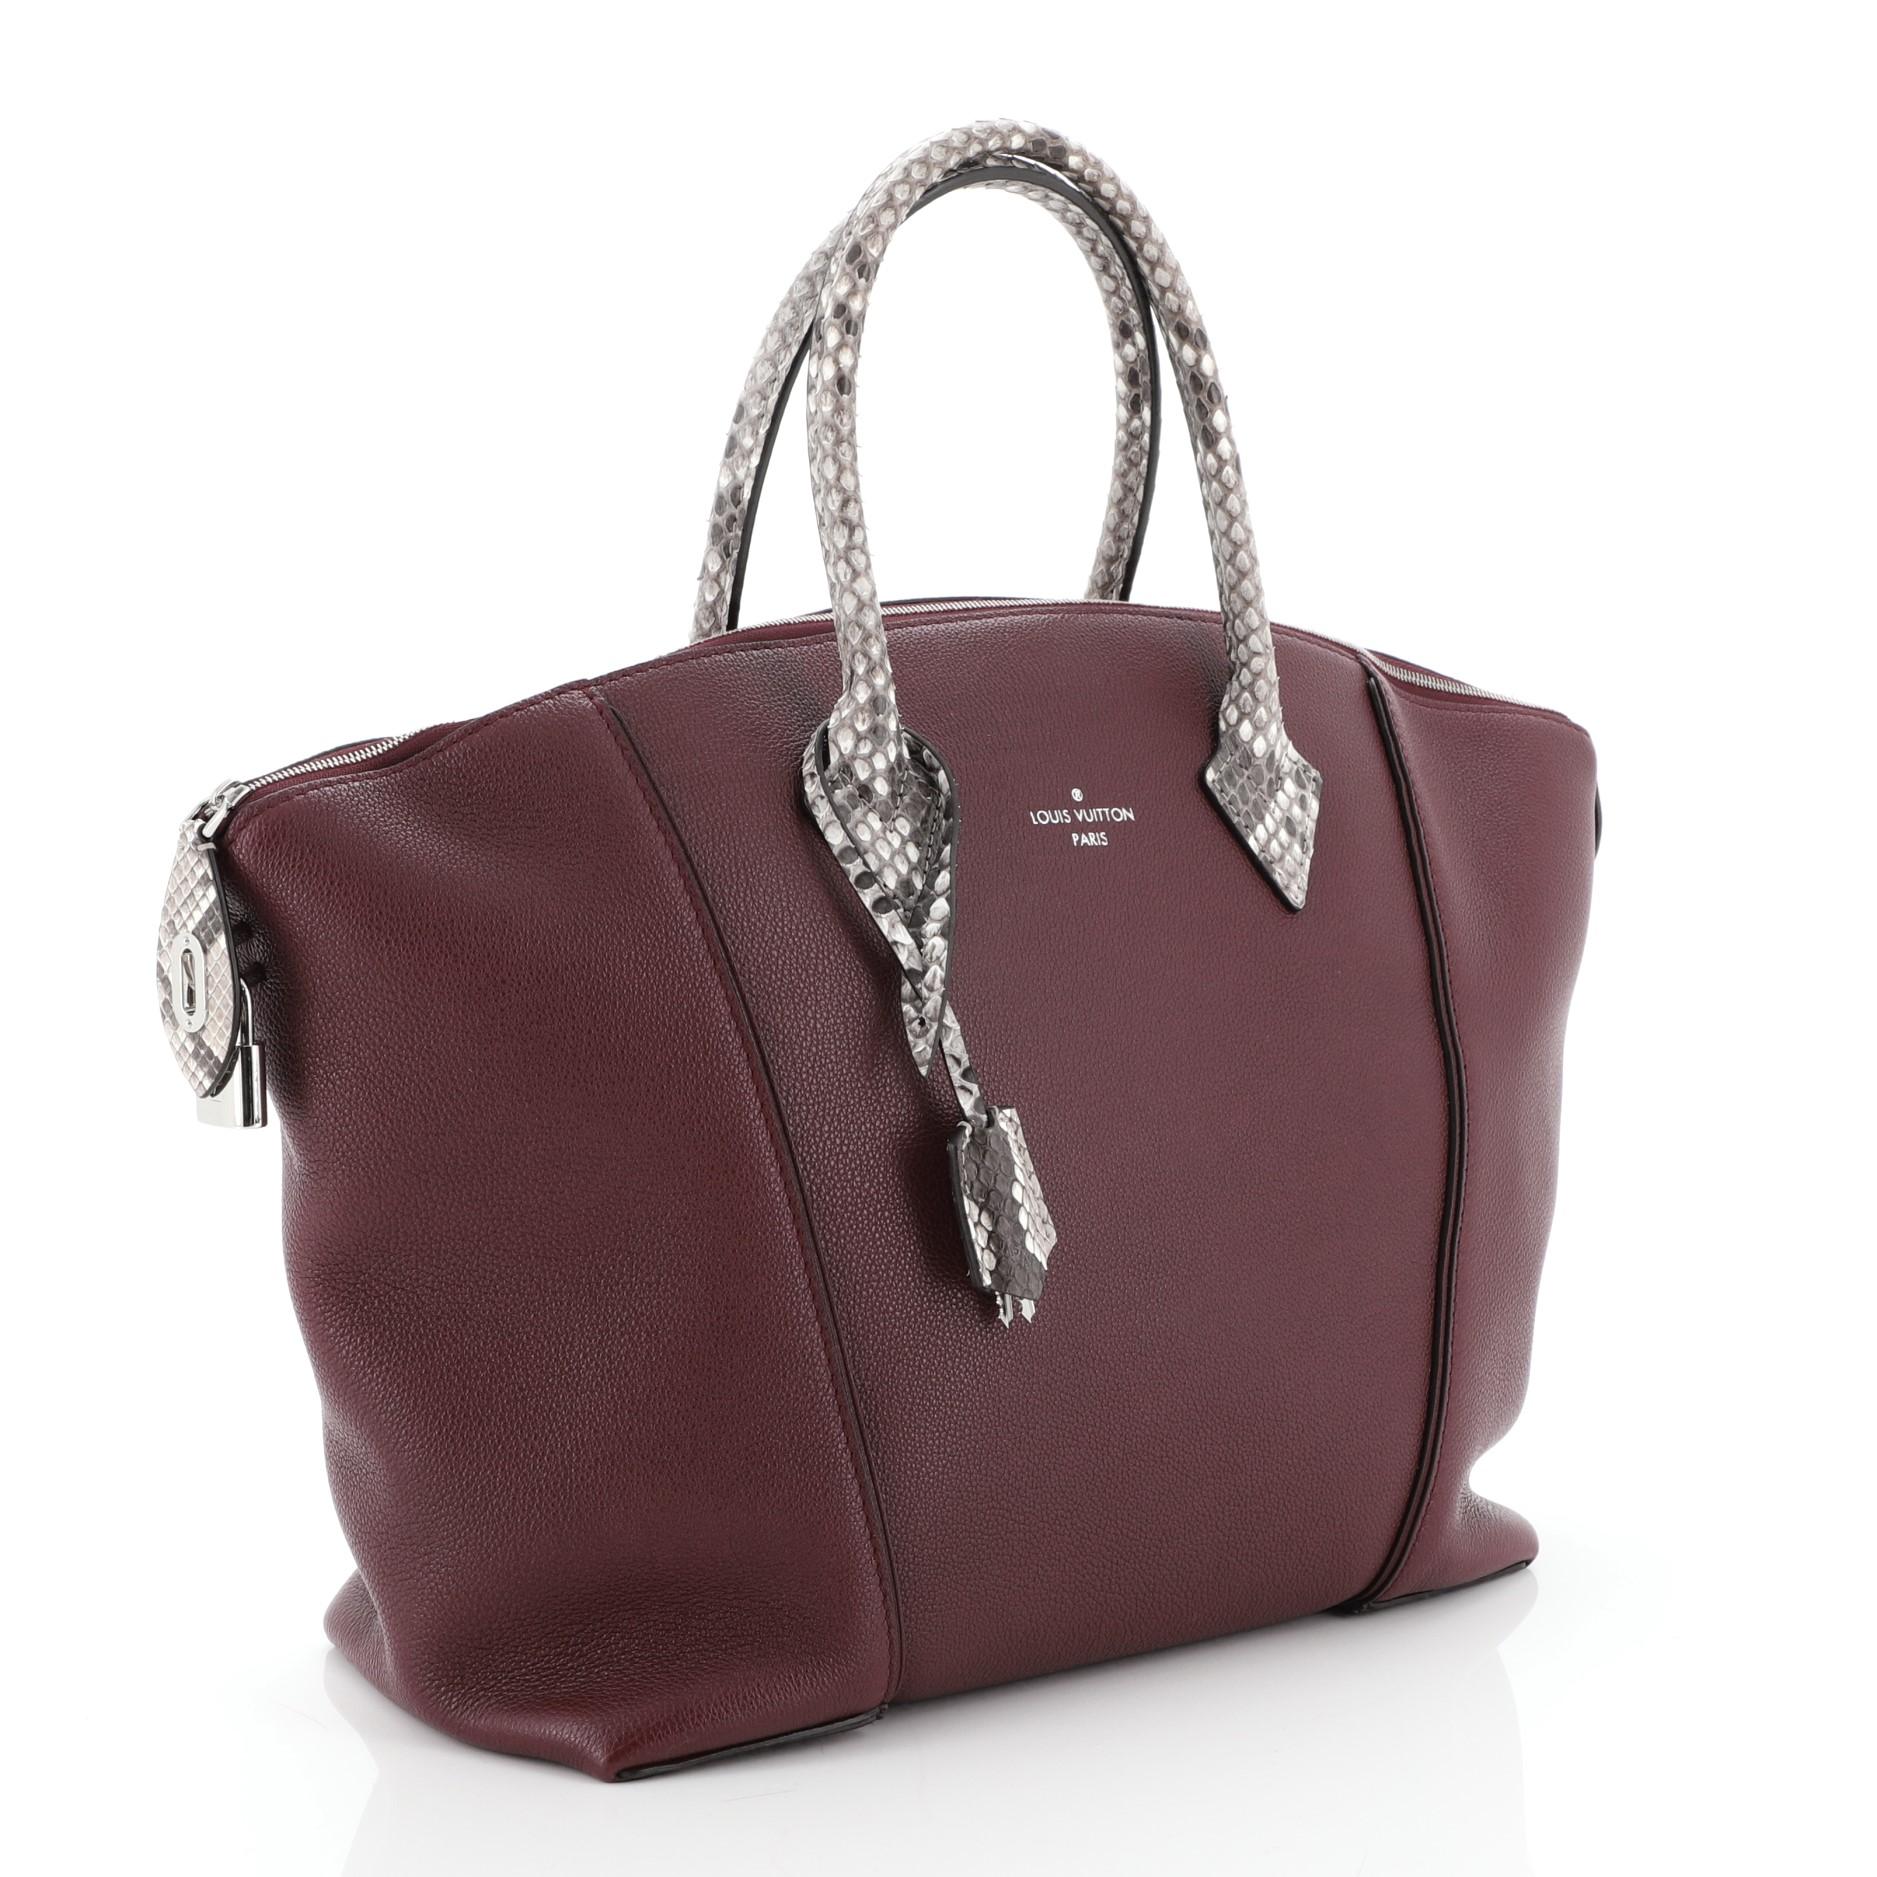 This Louis Vuitton Soft Lockit Handbag Leather with Python MM, crafted from red leather with genuine python, features dual rolled handles, curved top, LV padlock on its side, and silver-tone hardware. Its zip closure opens to a brown suede interior